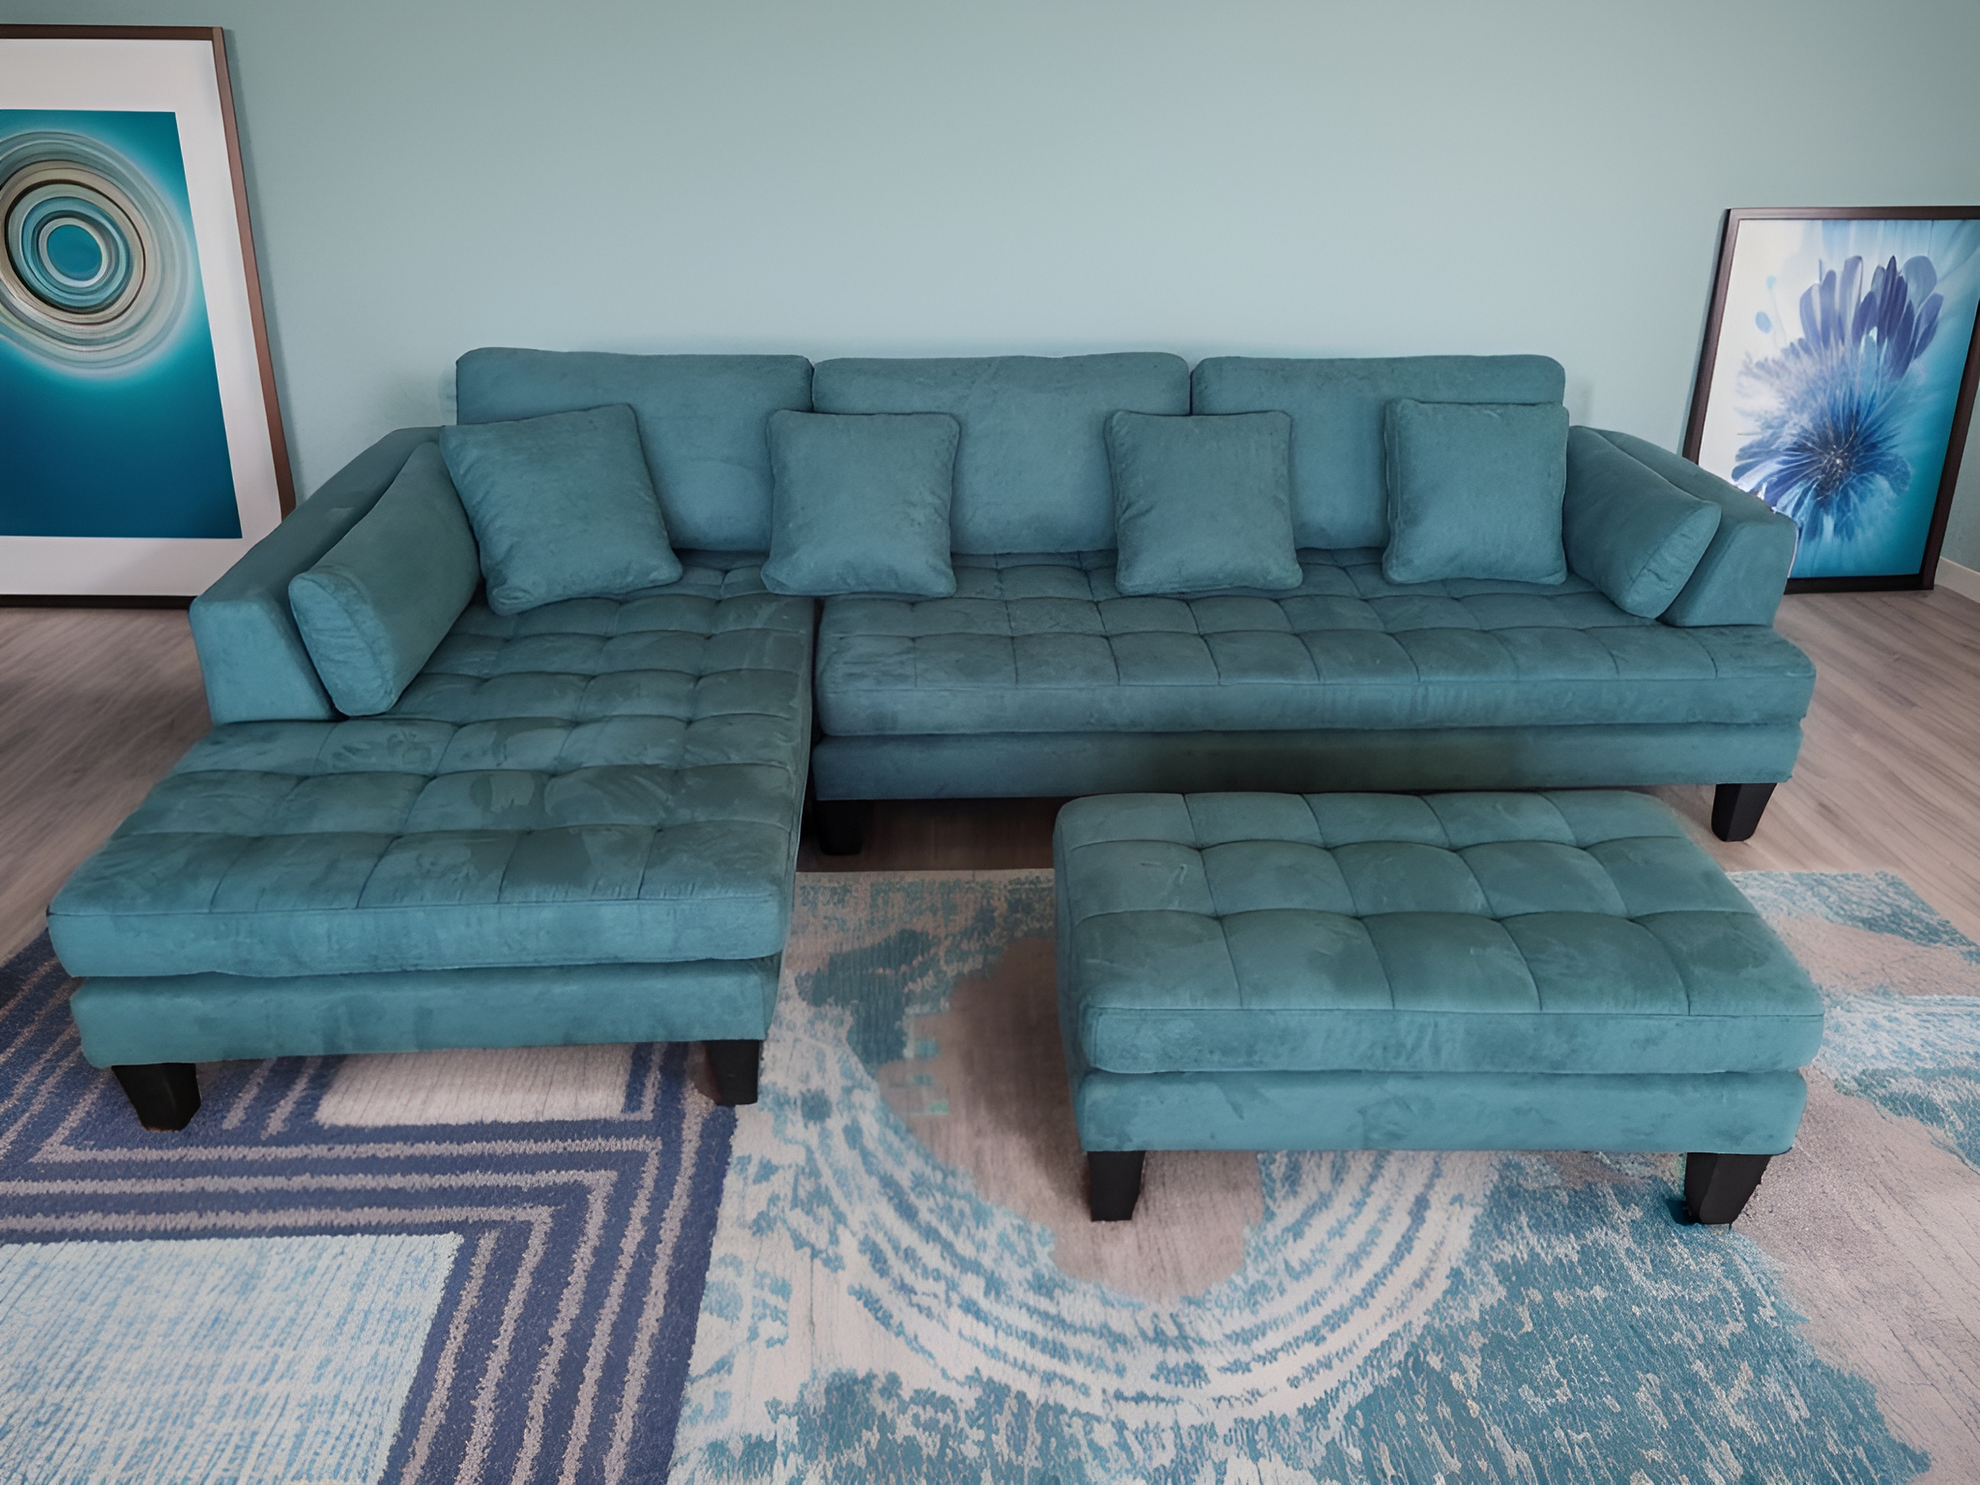 S168ltb 3pc Contemporary Dark Teal Blue Microfiber Fabric Sectional Couch Sofa Chaise Ottoman Stendmar